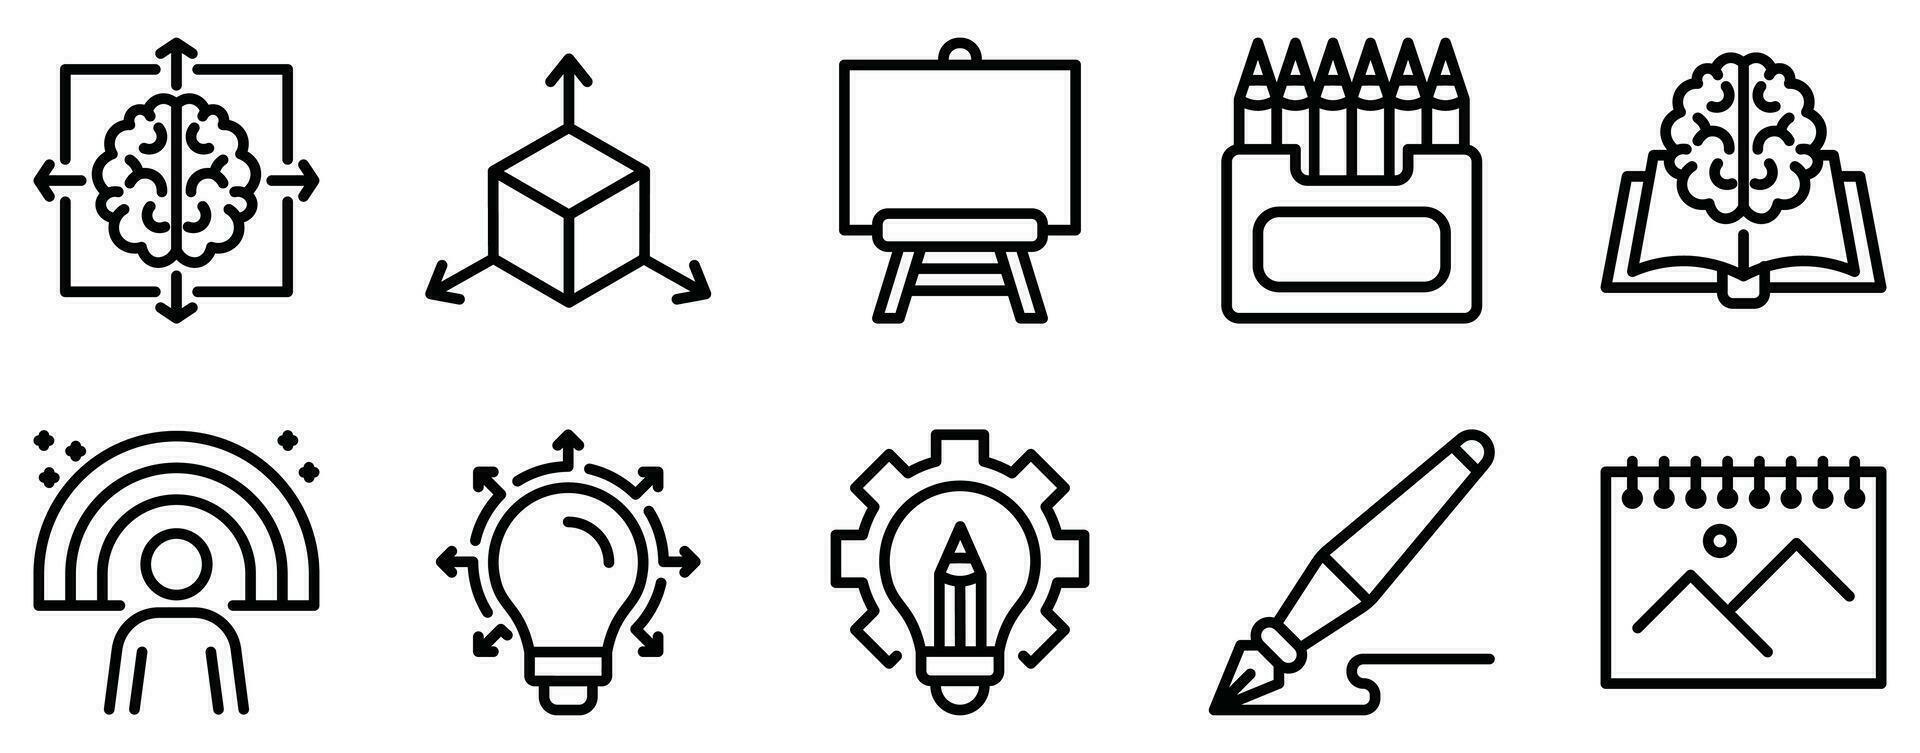 creative tools line style icon set collection vector